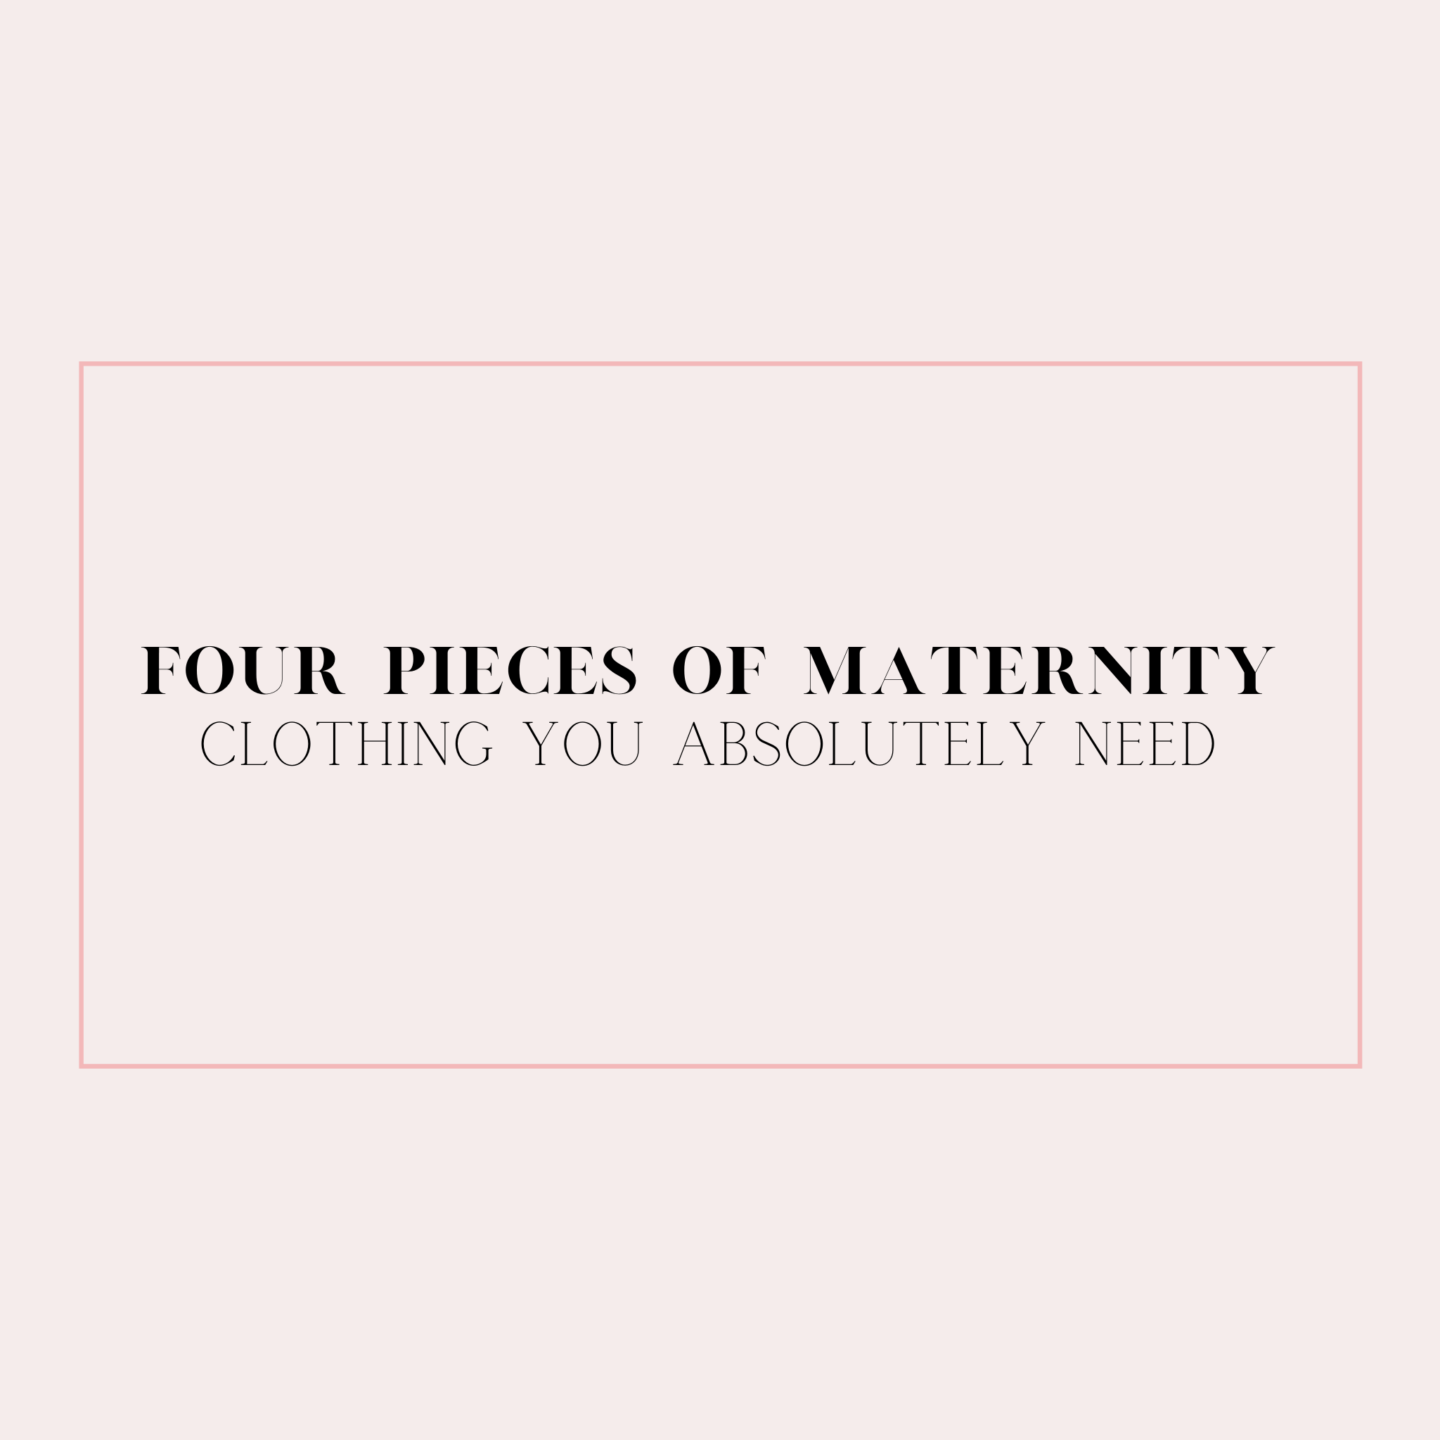 Four Pieces of Maternity Clothing You Absolutely Need